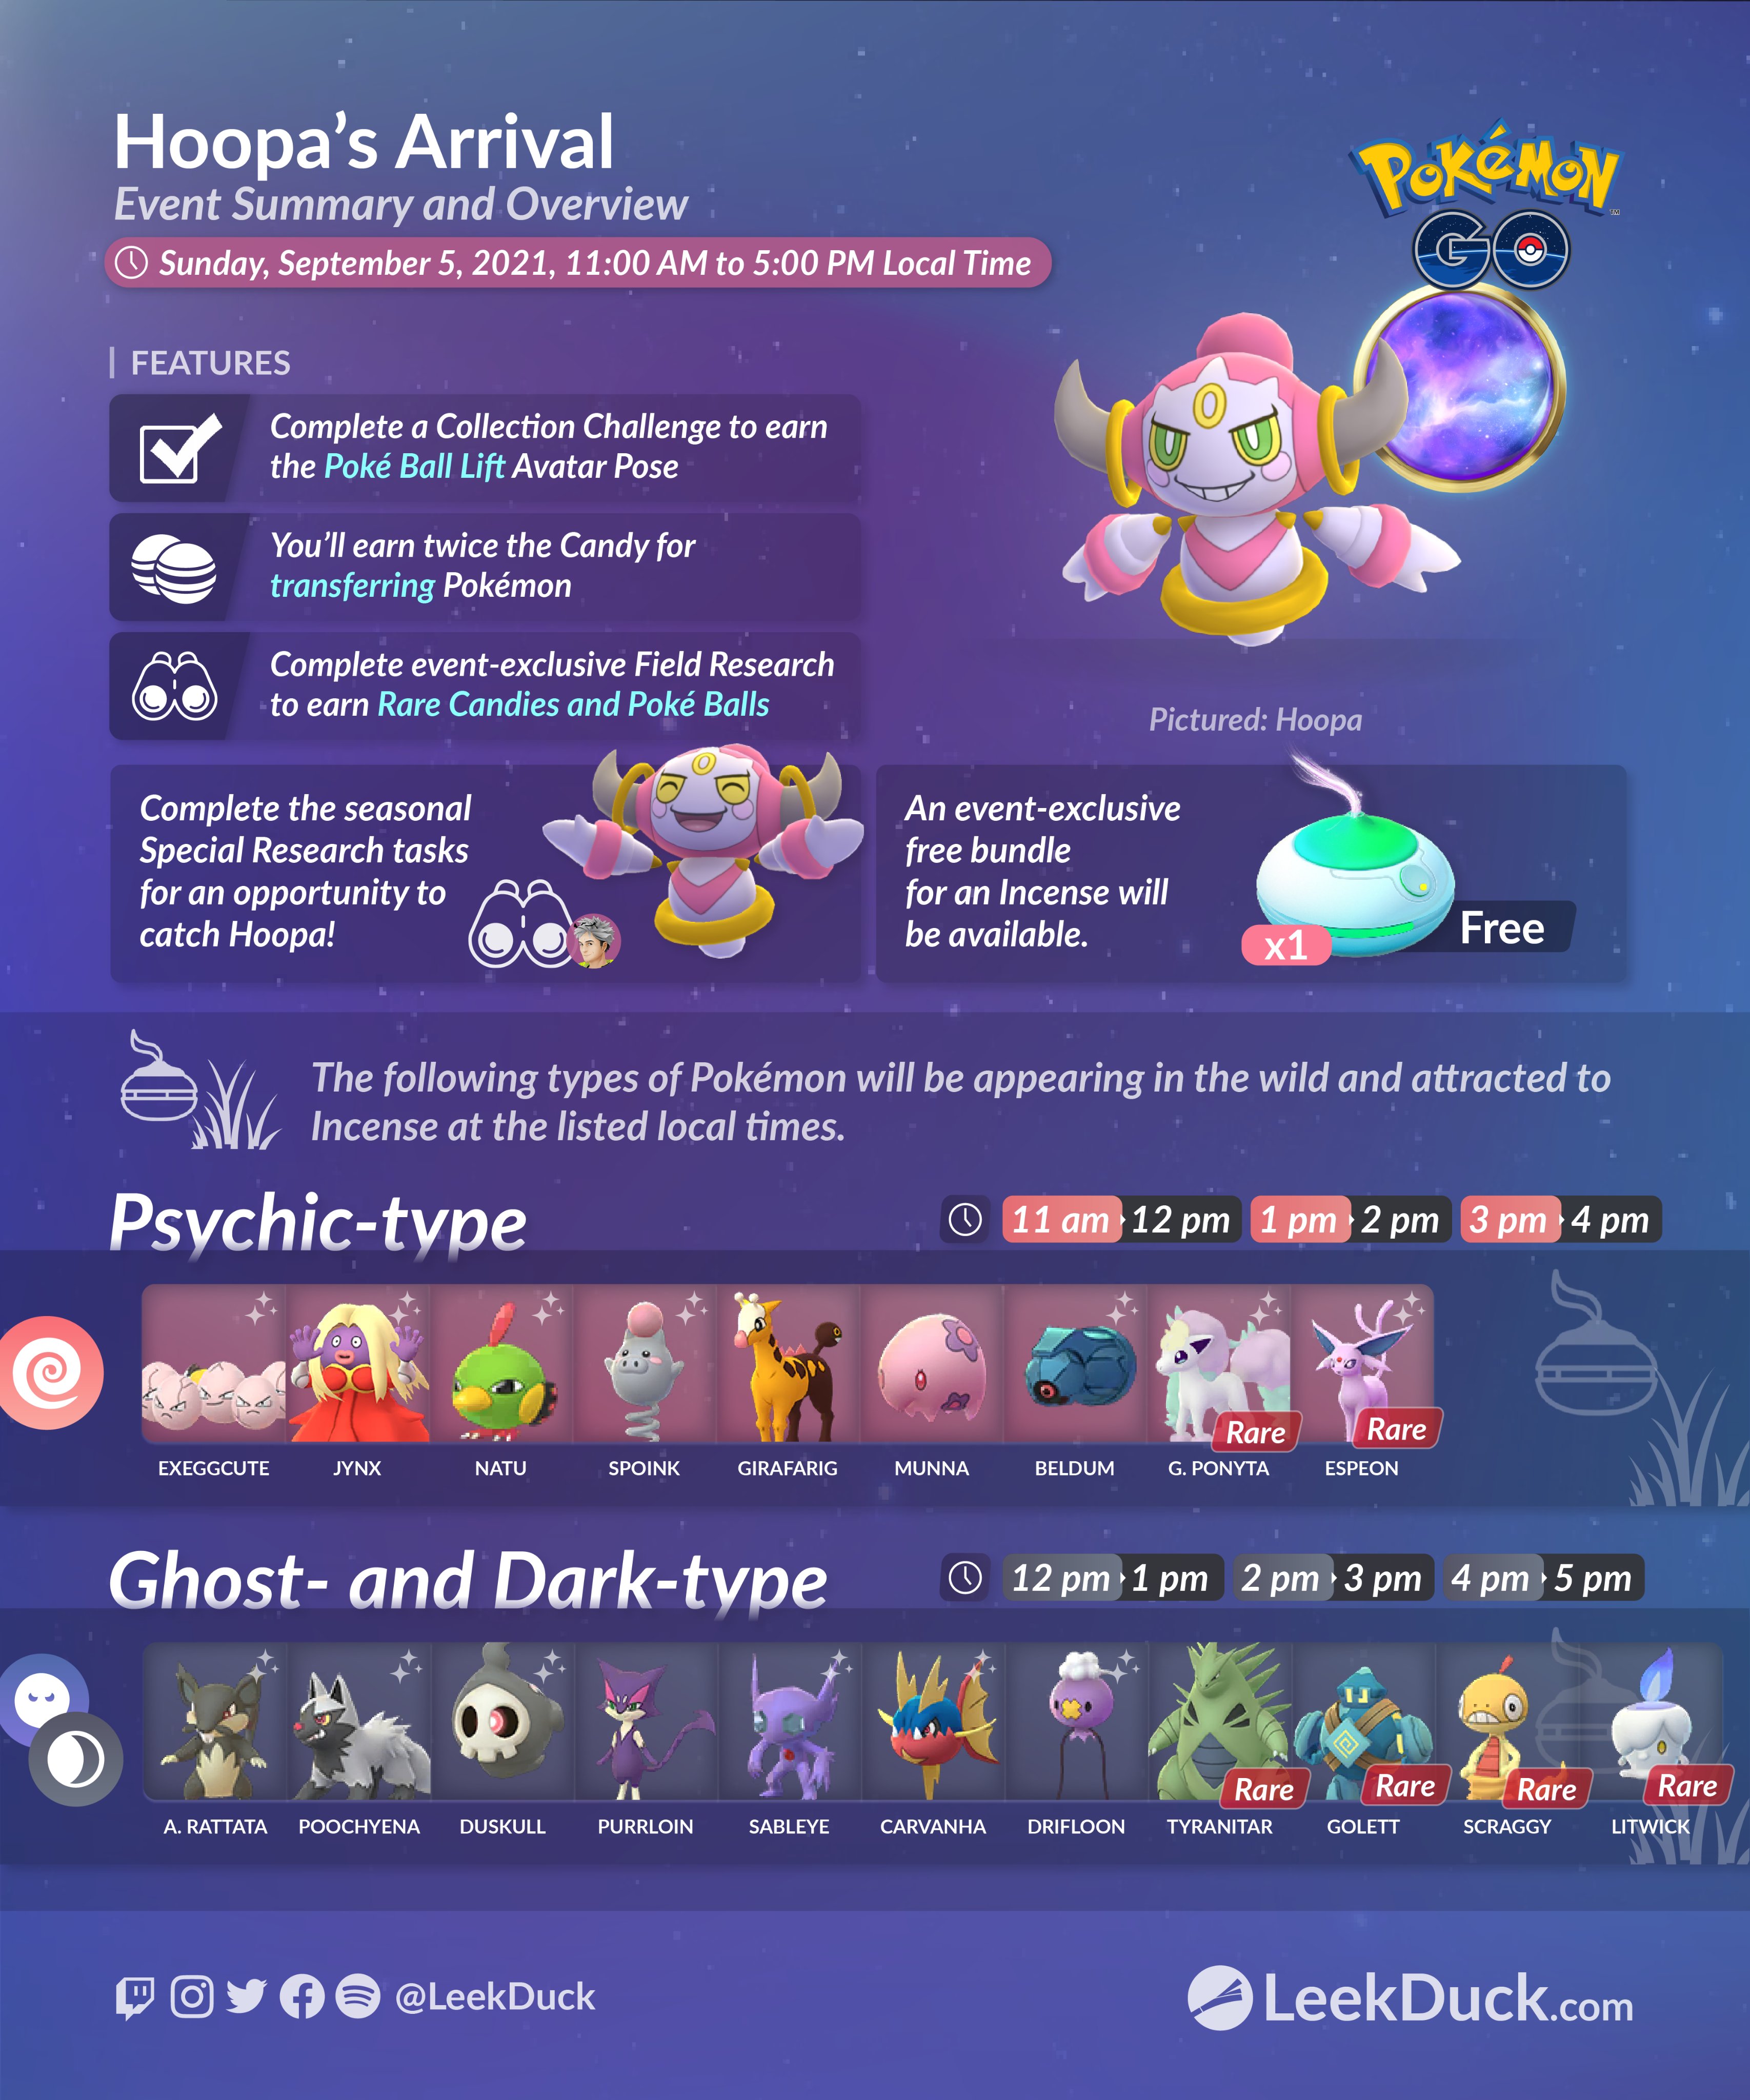 Leek Duck - November's & December's Research Breakthrough Encounters  include Articuno, Zapdos, Moltres, Kyogre, and Groudon. If you're lucky,  you might encounter a shiny. Save a copy at